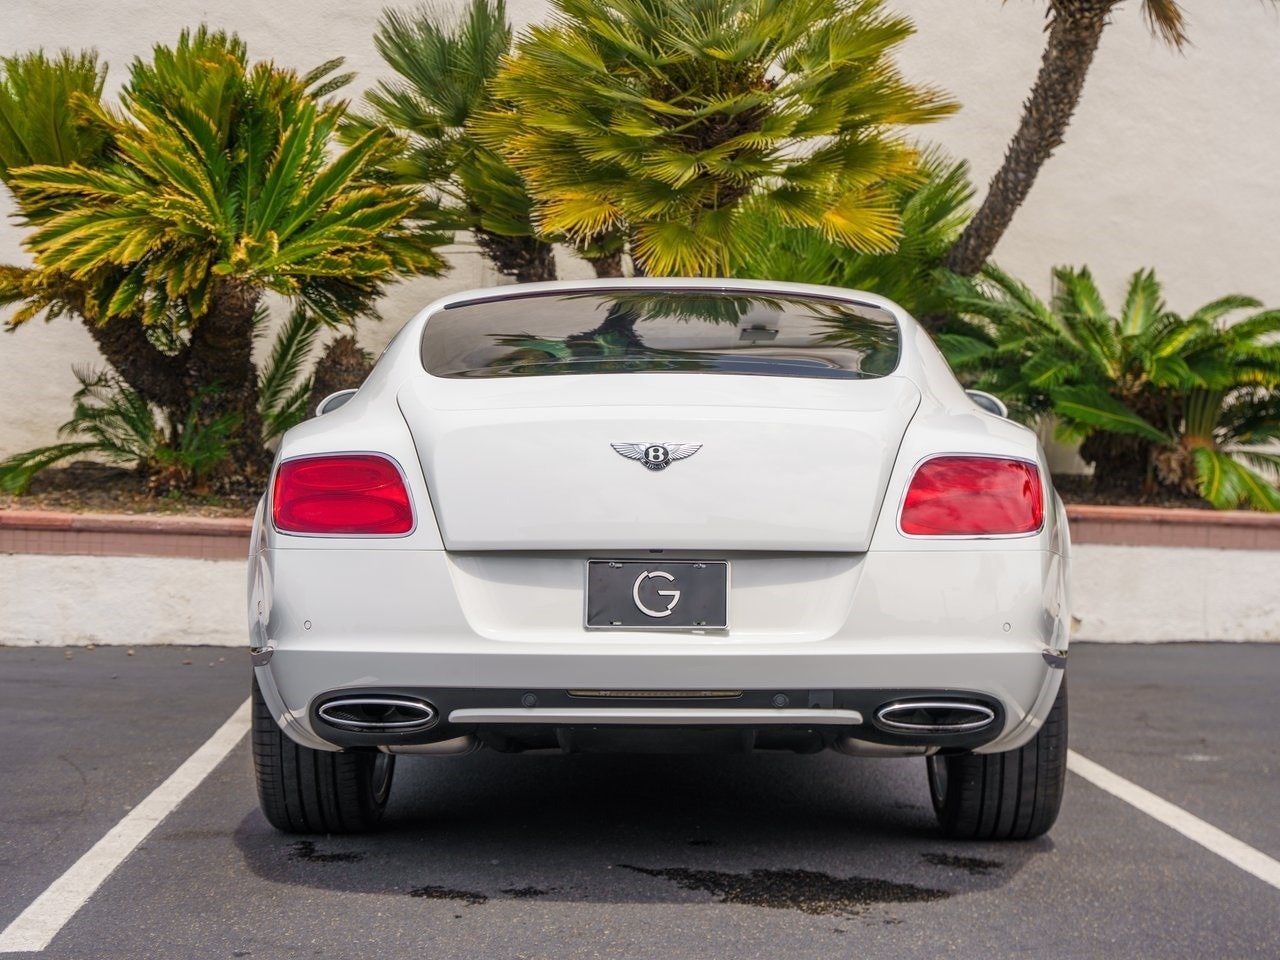 2013 Bentley GT For Sale Coupe (13)